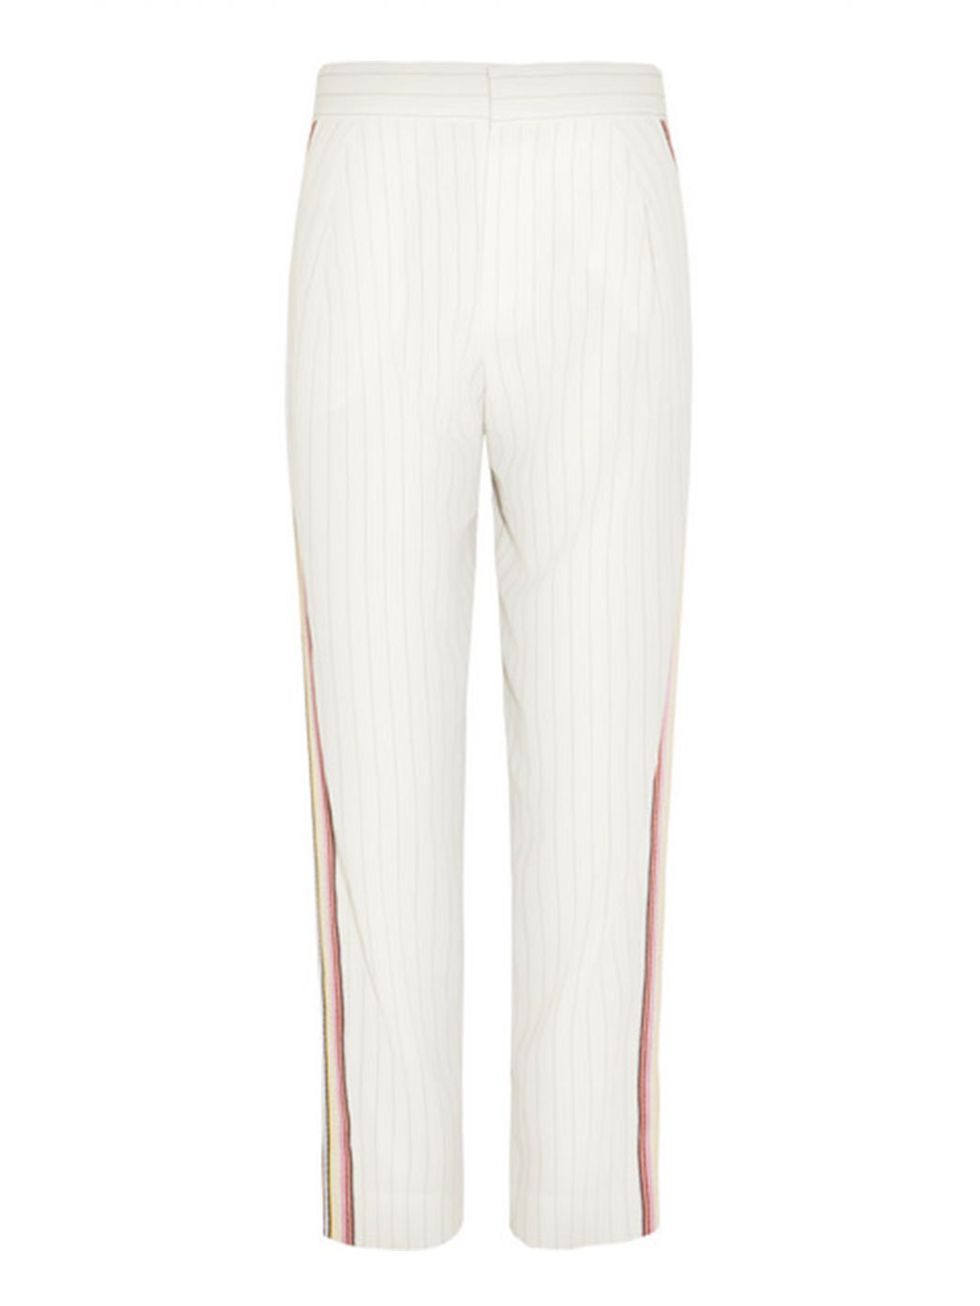 <p>Chloe Trousers, £660, <a href="http://www.net-a-porter.com/product/428237/Chloe/pinstriped-woven-tapered-pants">net-a-porter.com </a></p>